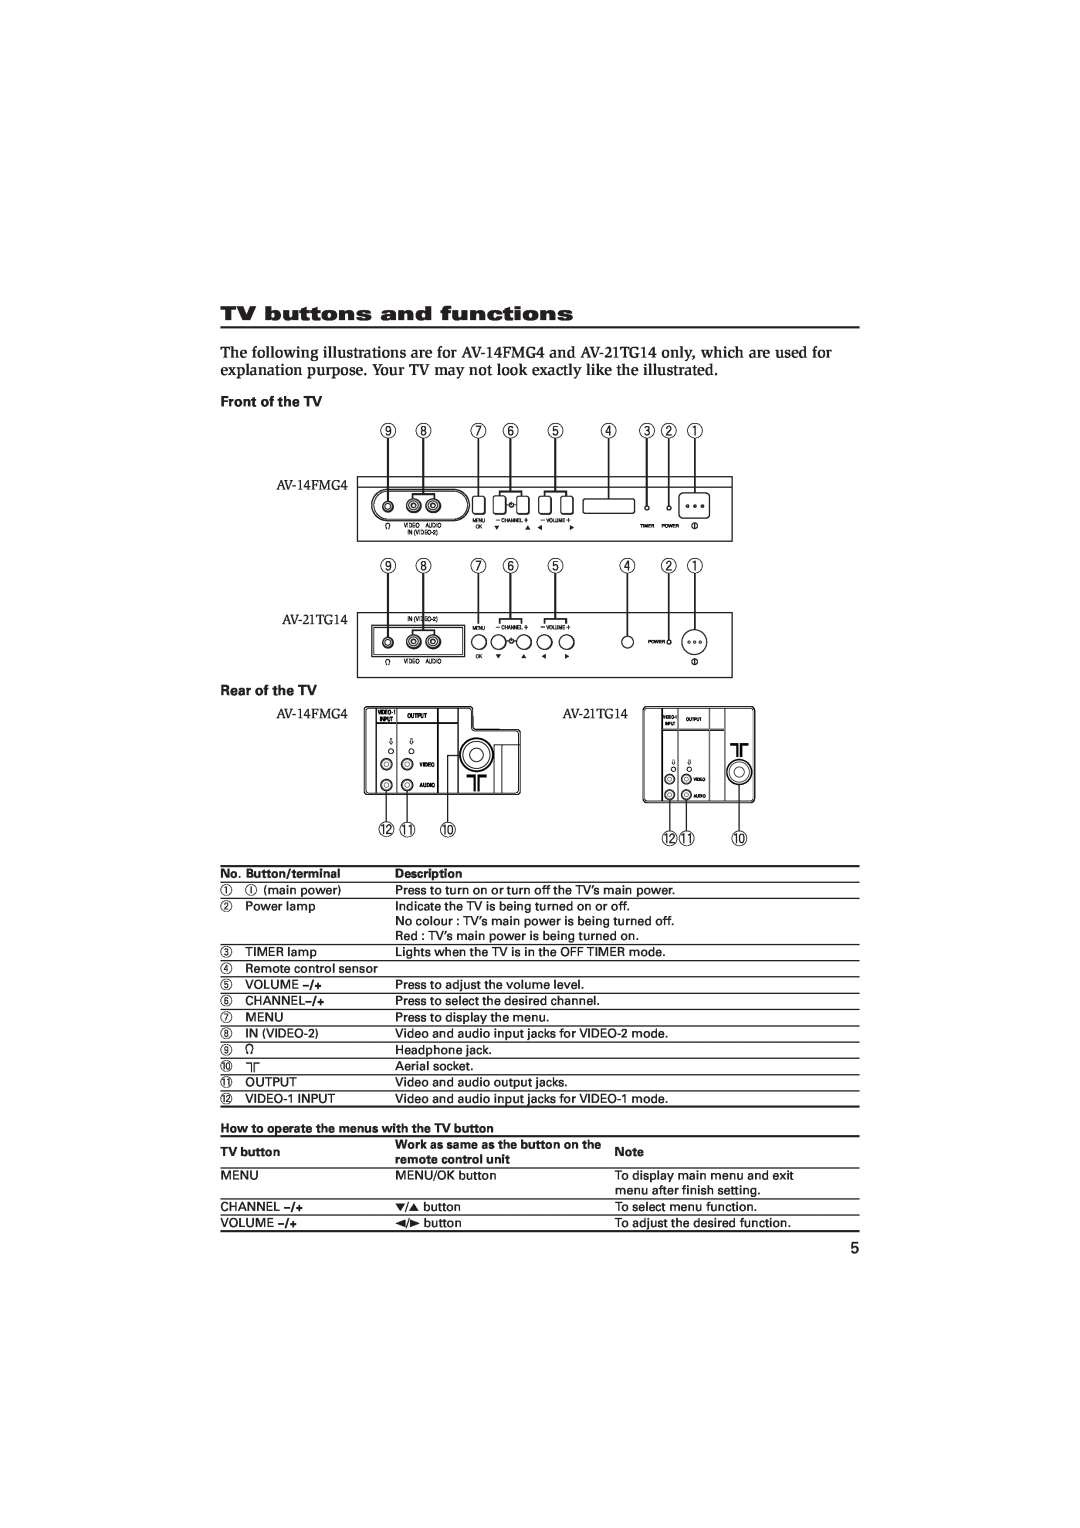 JVC AV-21CMT4 TV buttons and functions, Front of the TV, Rear of the TV, AV-21TG14, No. Button/terminal, Description 